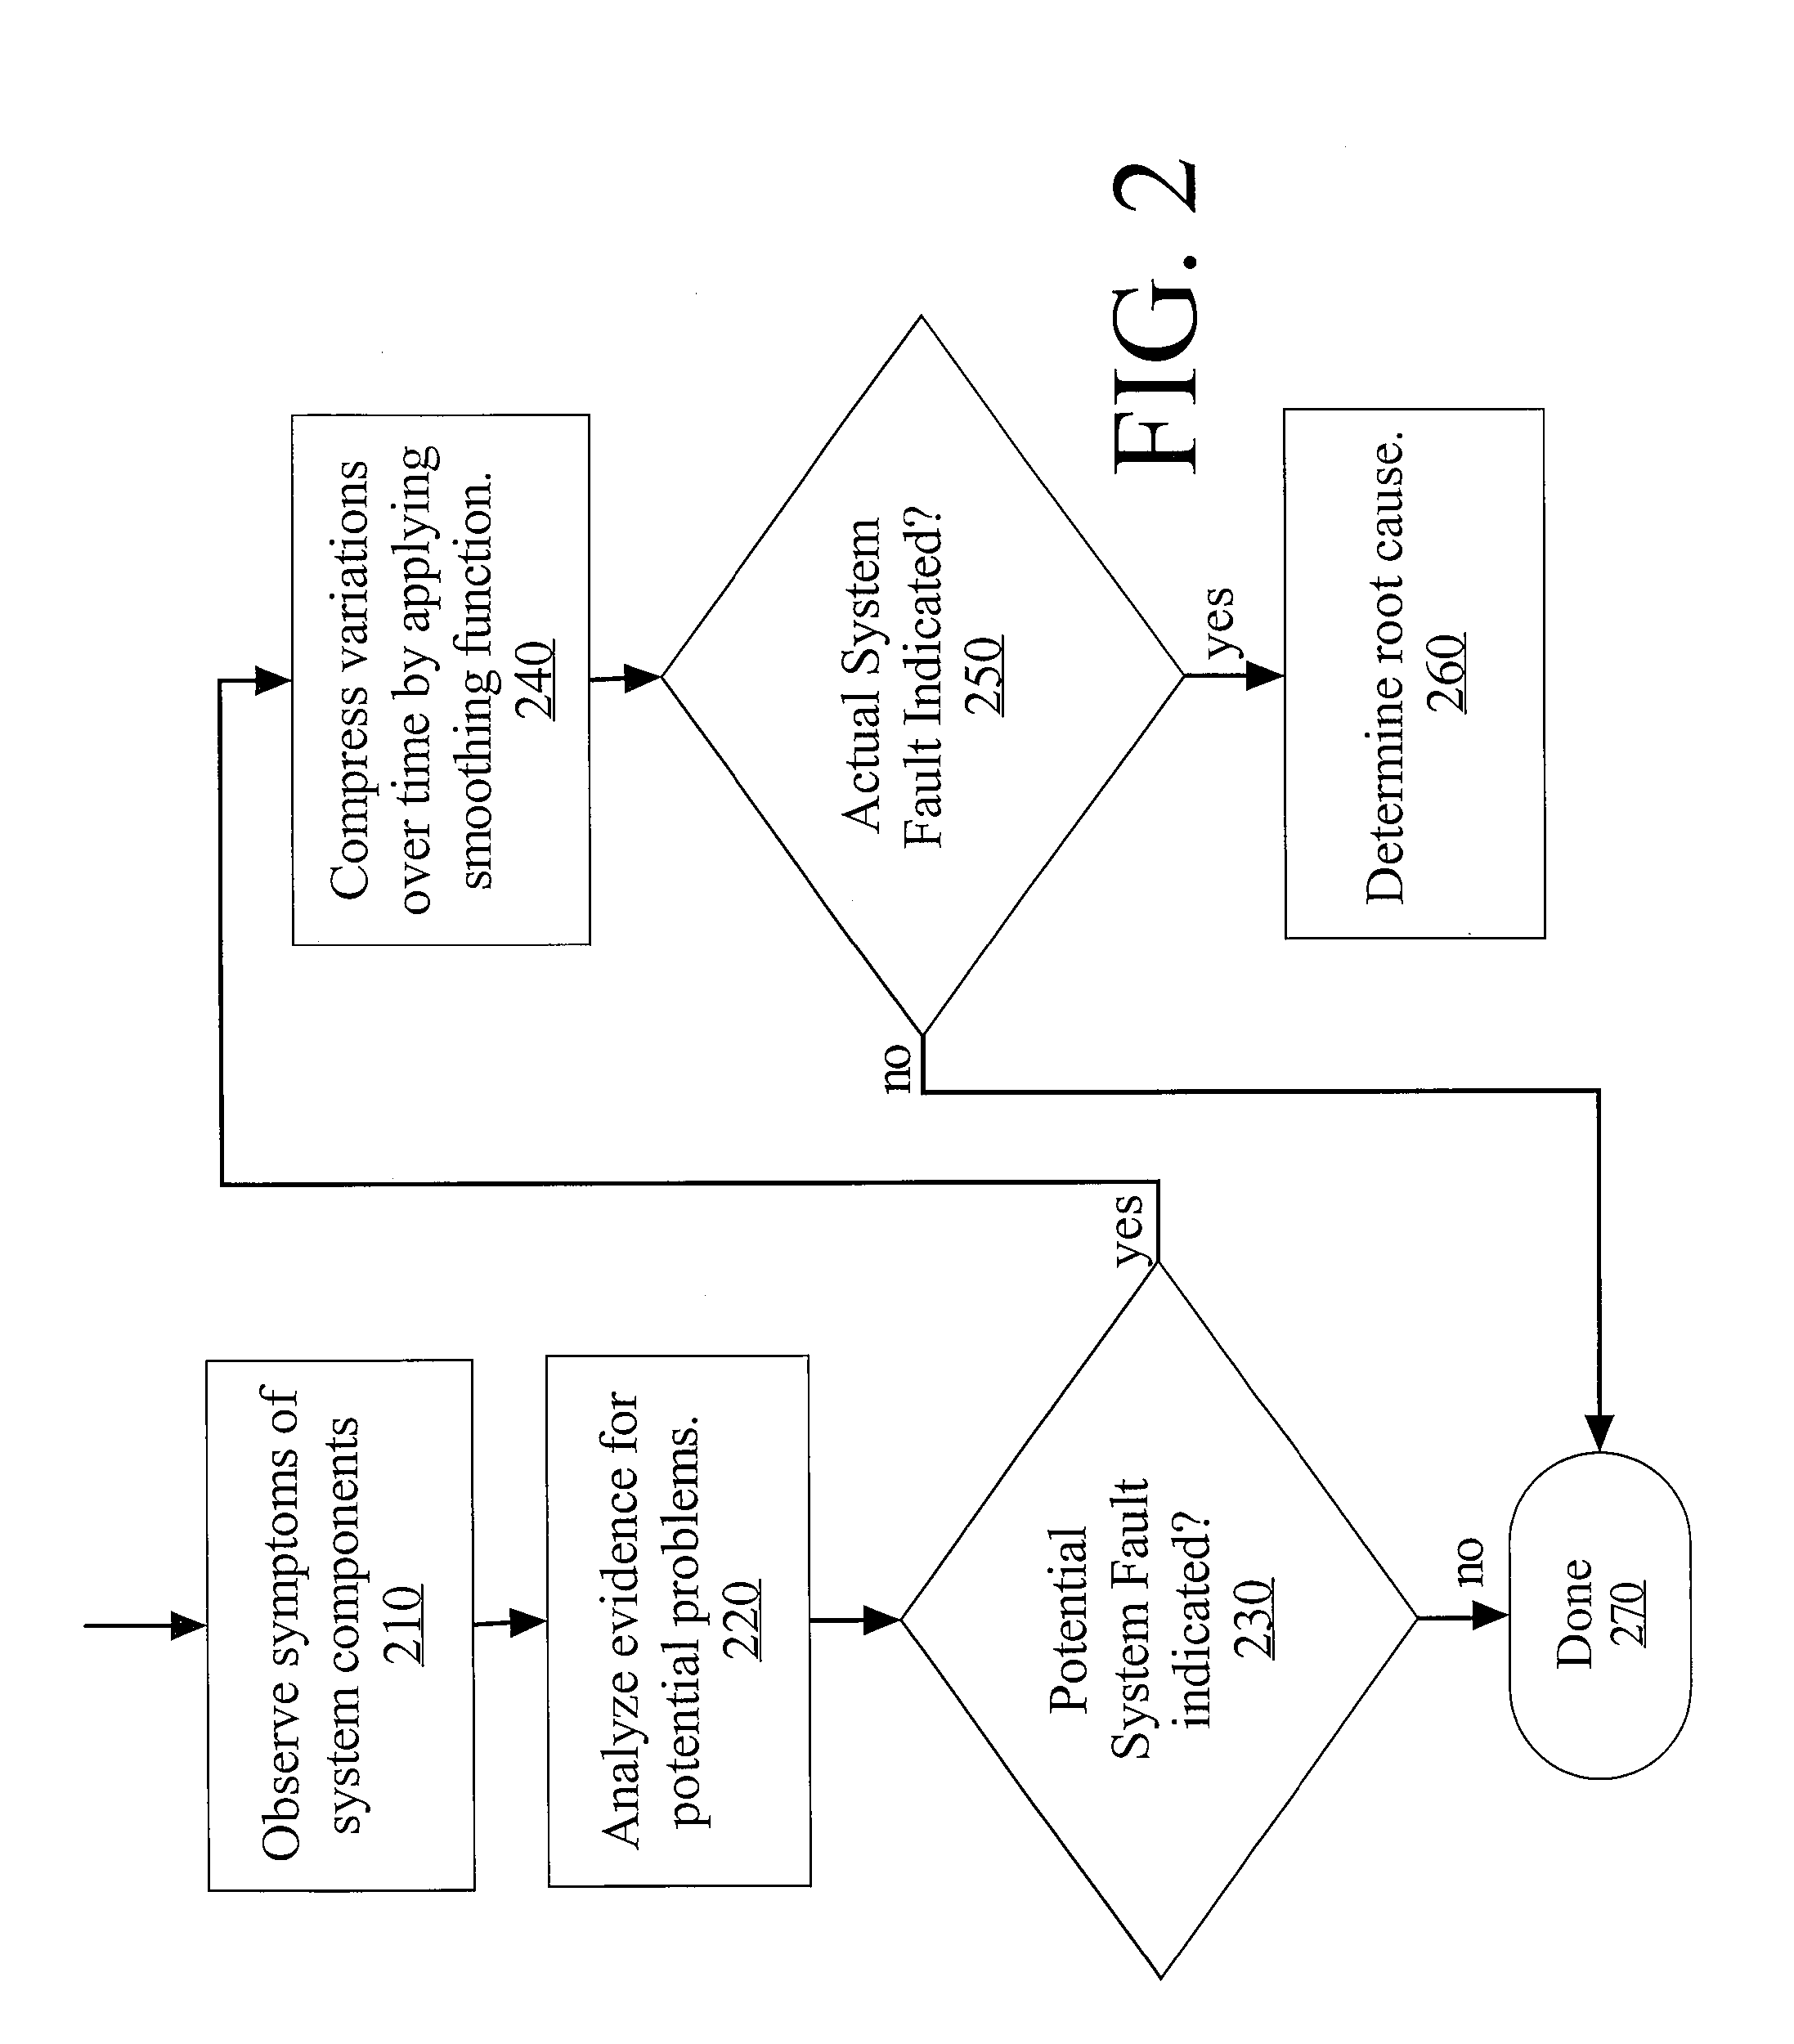 Method and apparatus for dealing with accumulative behavior of some system observations in a time series for bayesian inference with a static bayesian network model